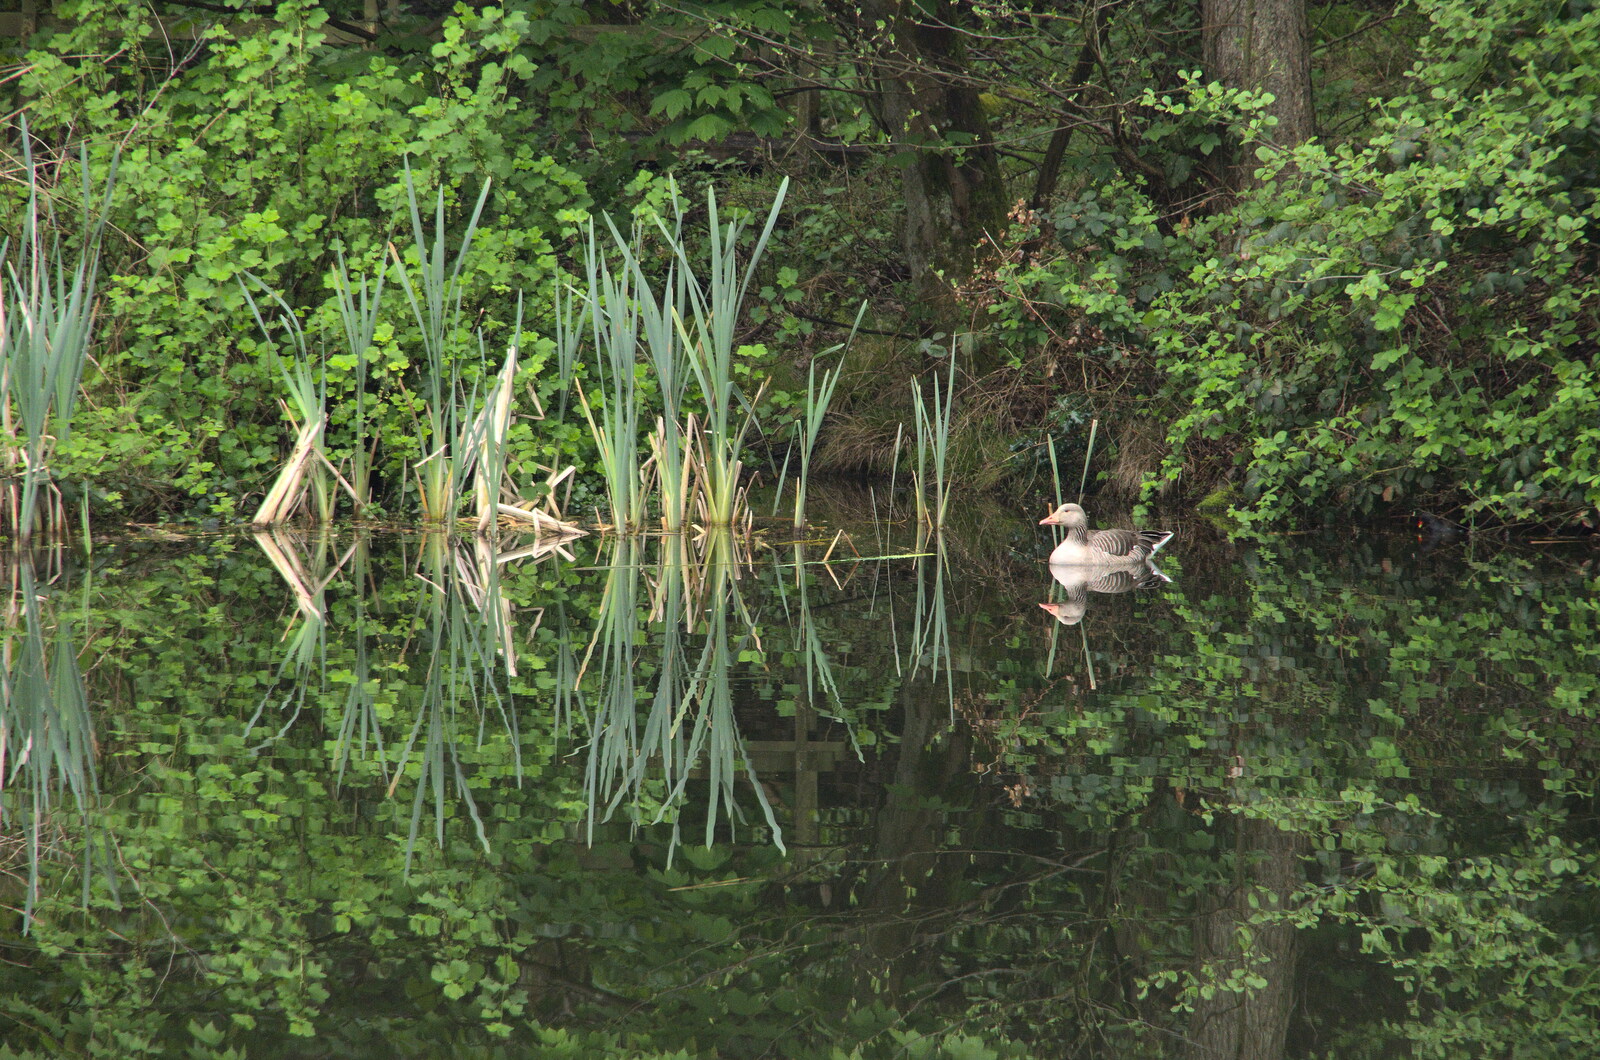 A small goose floats around on a mirror-like pond from A Coronation Camping Picnic, Kelling Heath, Norfolk - 6th May 2023